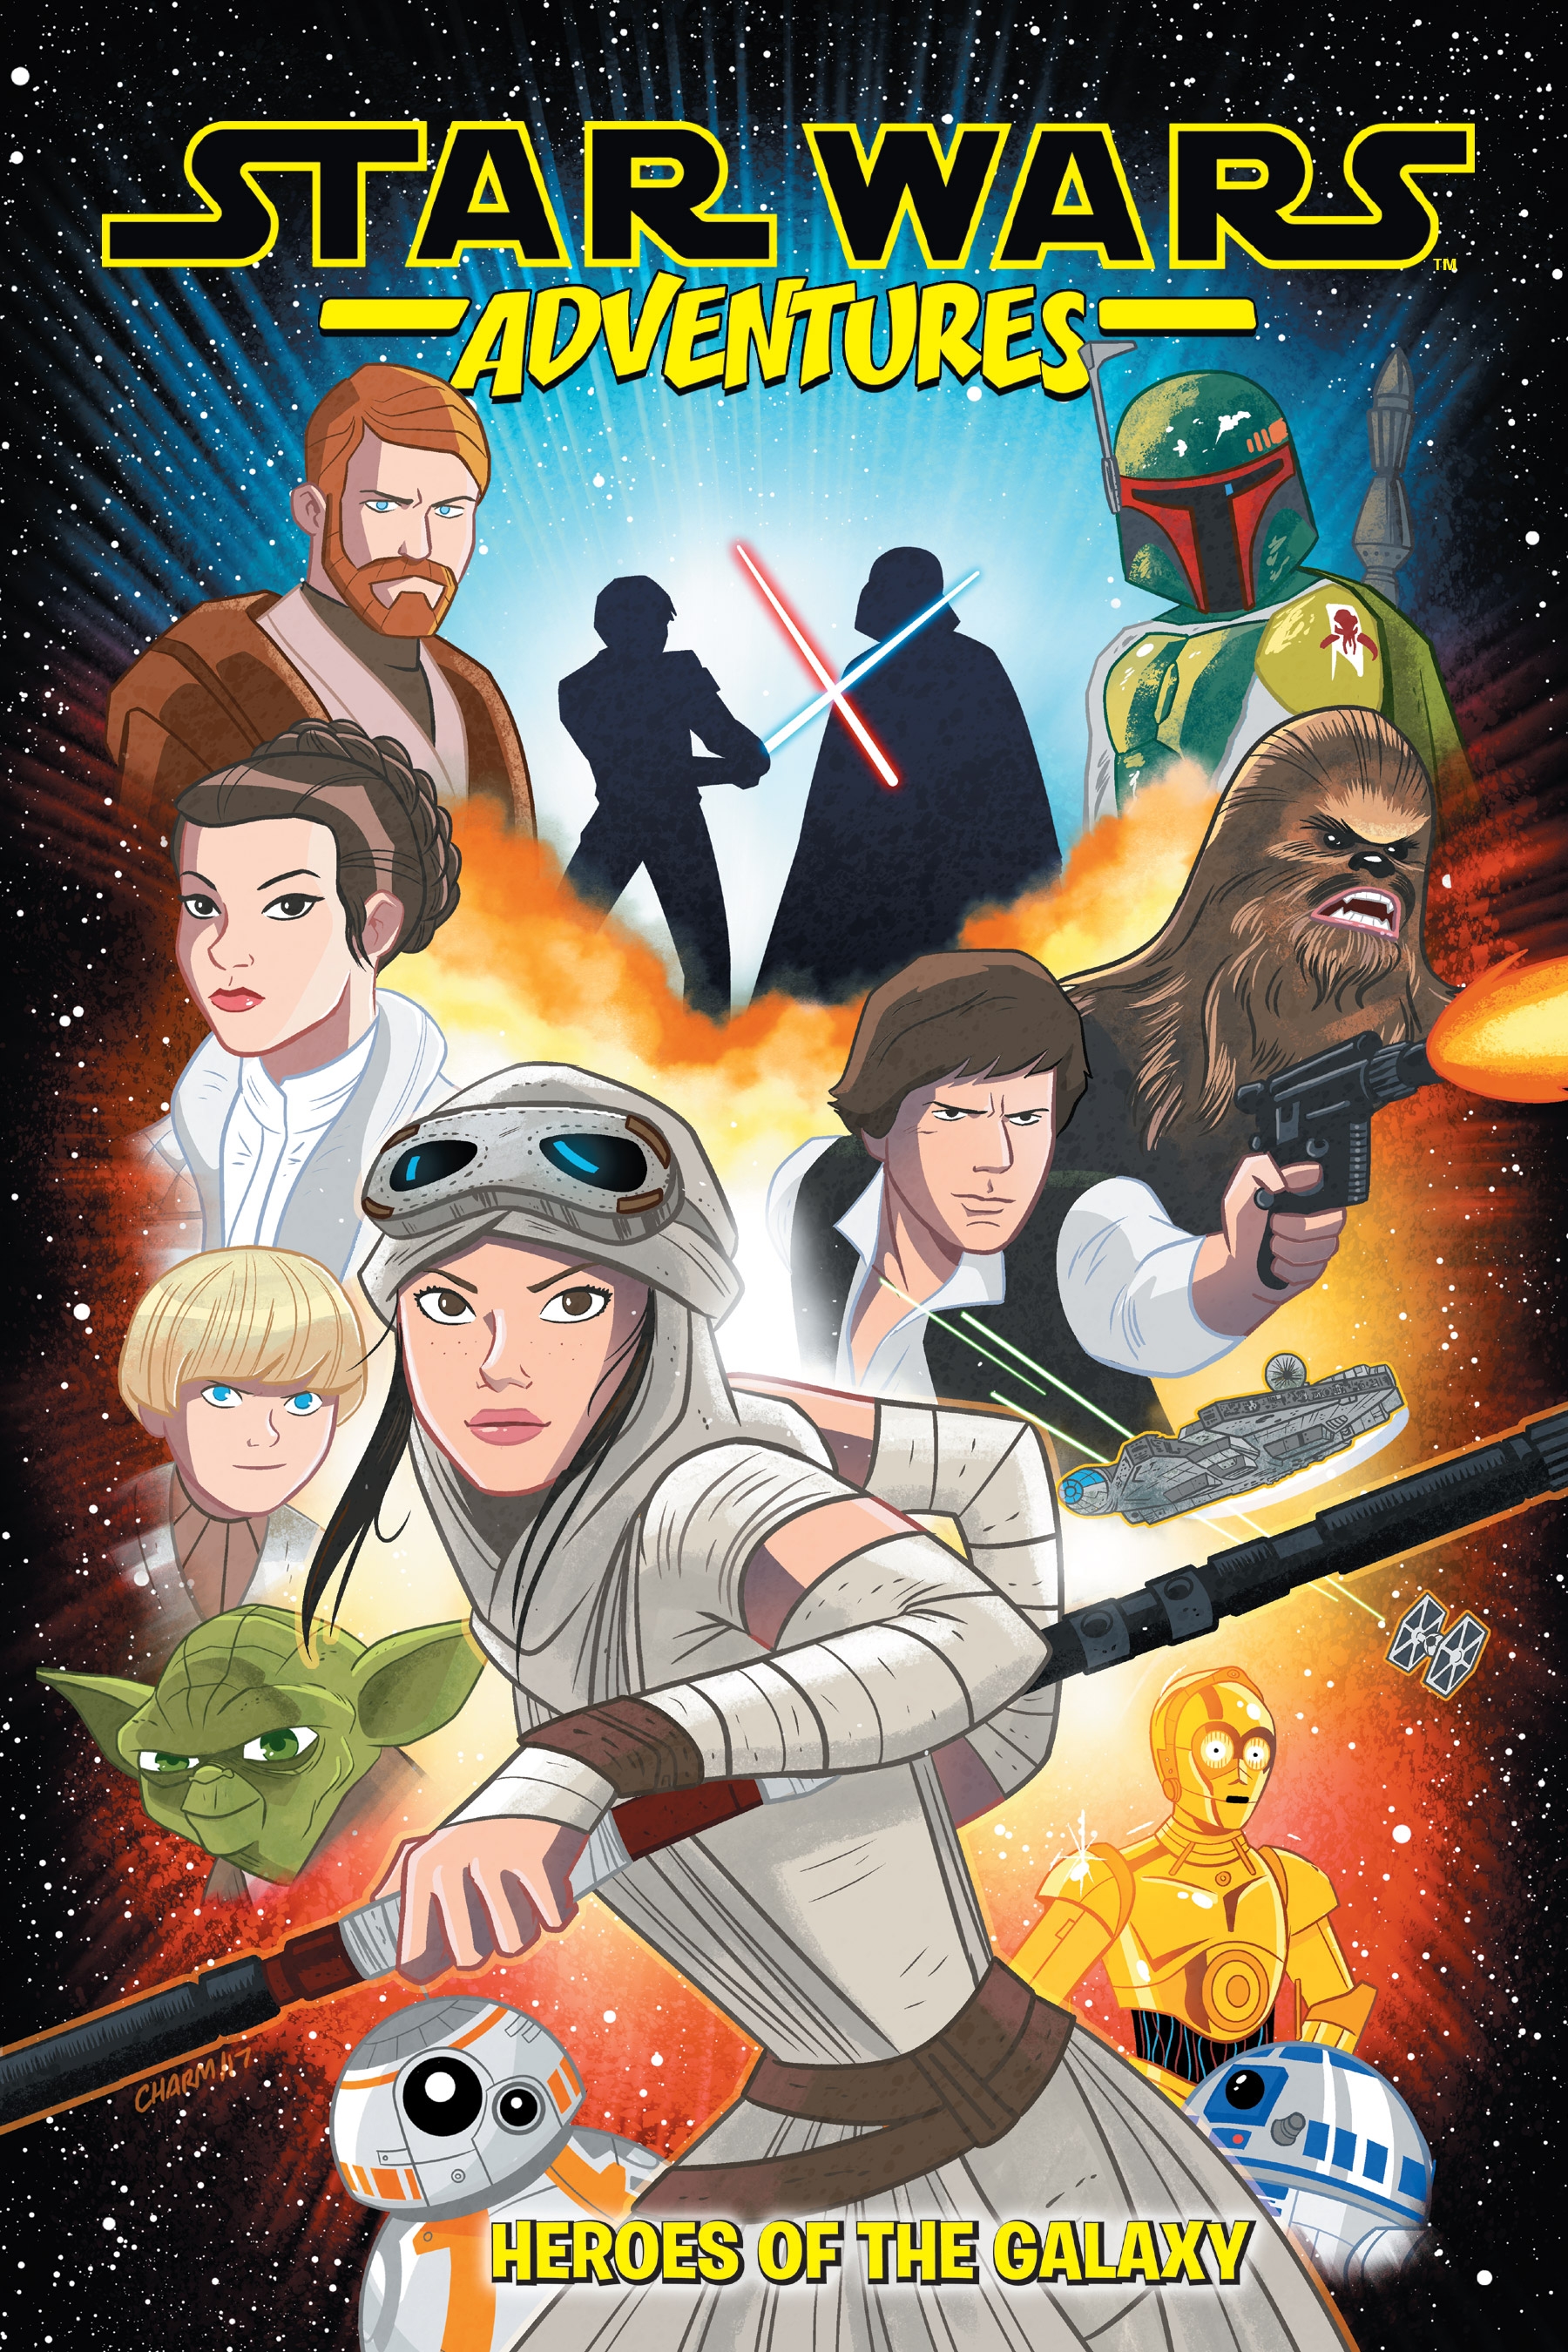 Image result for star wars adventures heroes of the galaxy